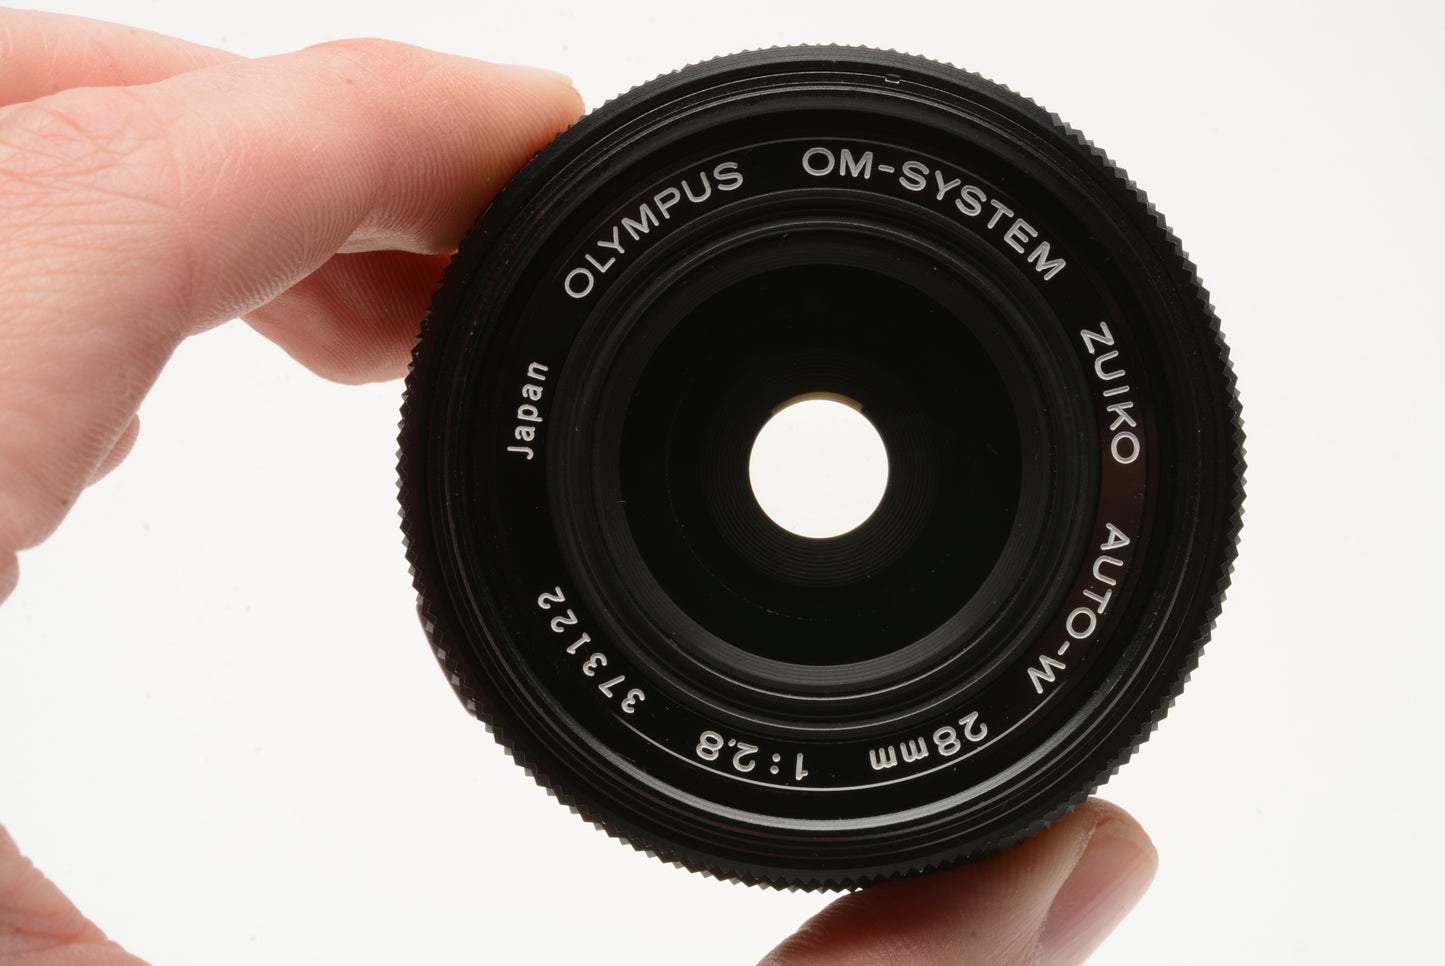 Olympus OM-System 28mm f2.8 wide angle lens, caps + case